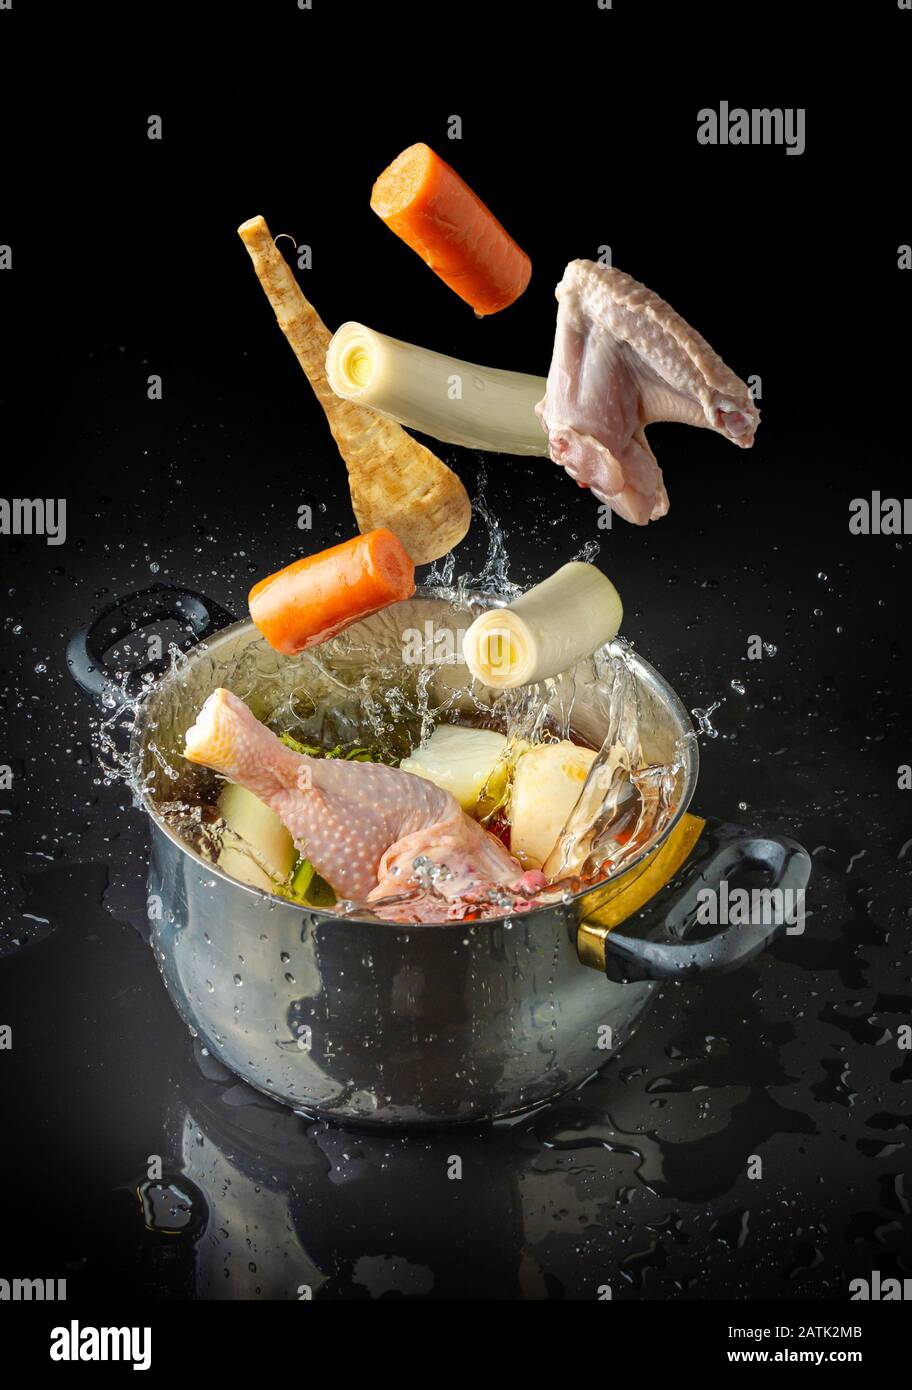 Ingredients for making broth flying towards a pot with splashing water on black background Stock Photo